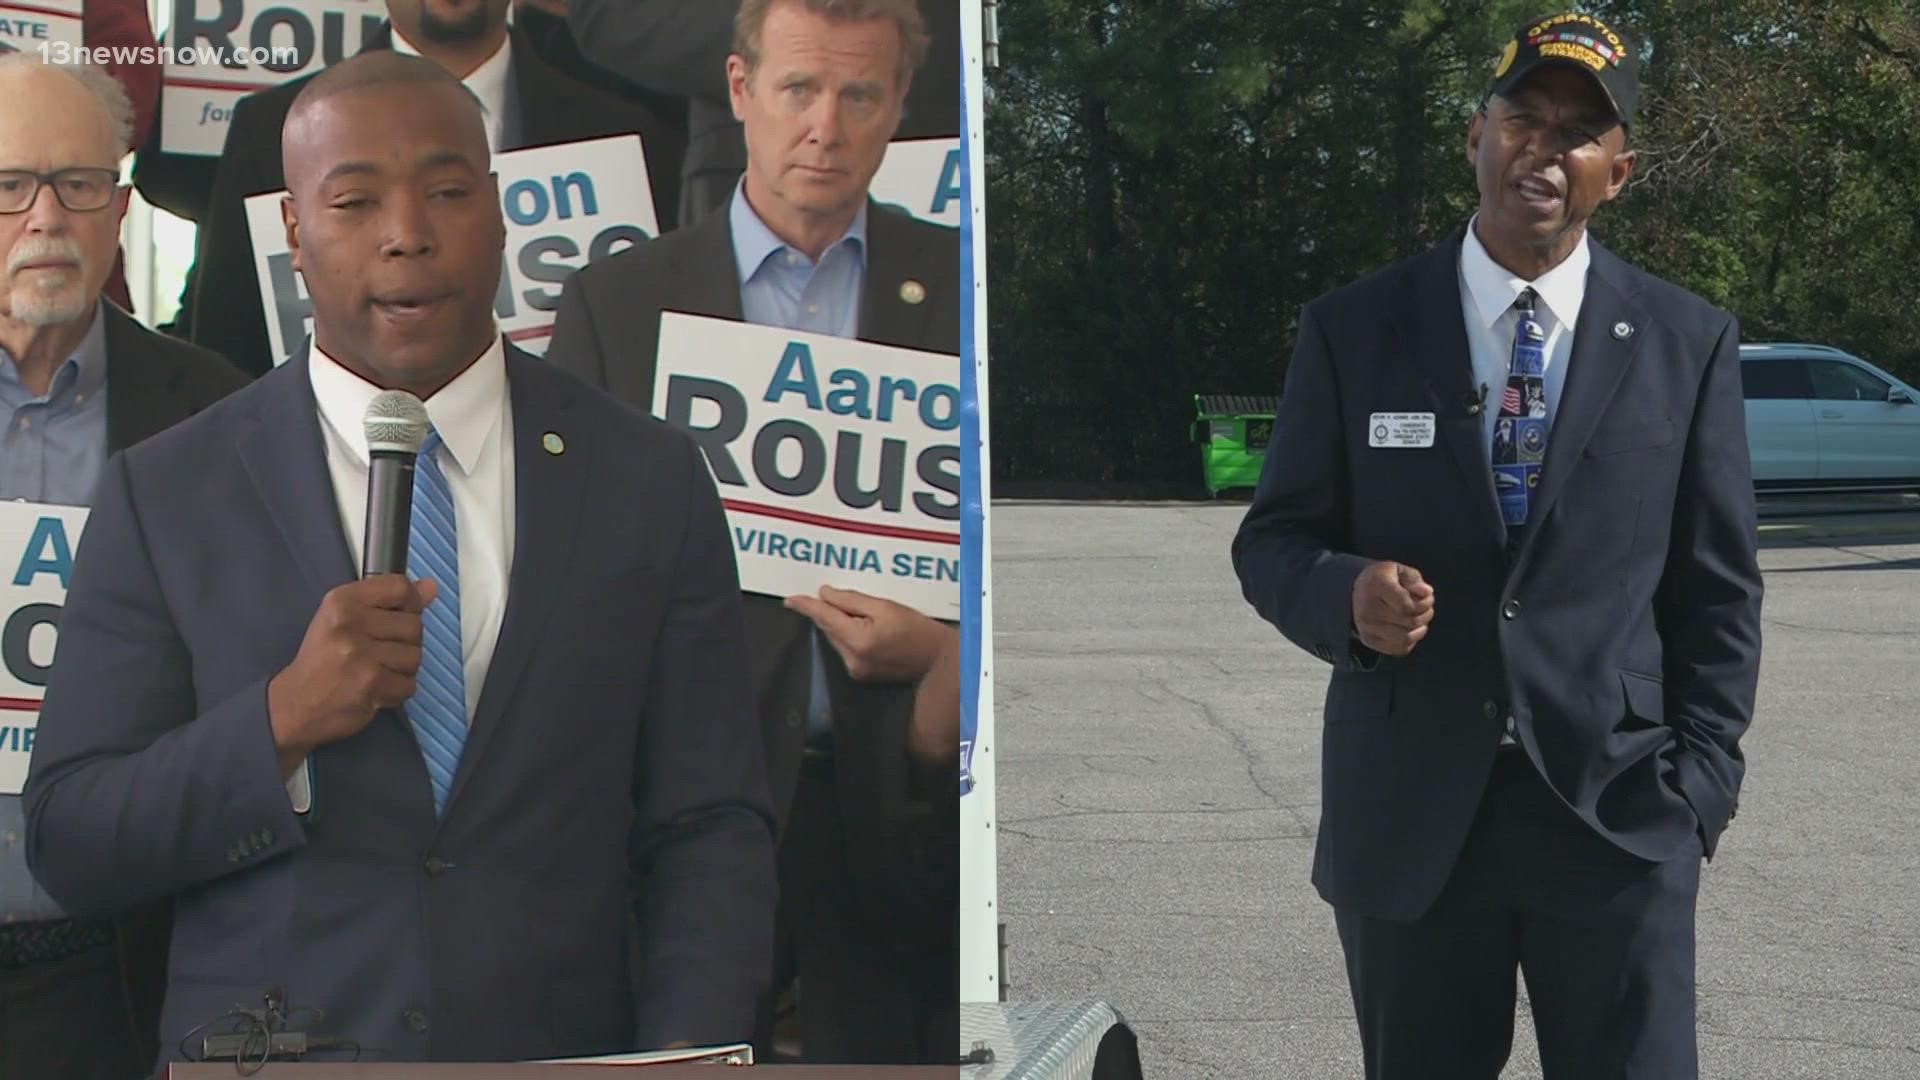 In the aftermath of the passing of Rep. Don McEachin, candidates are starting to emerge for the special election.